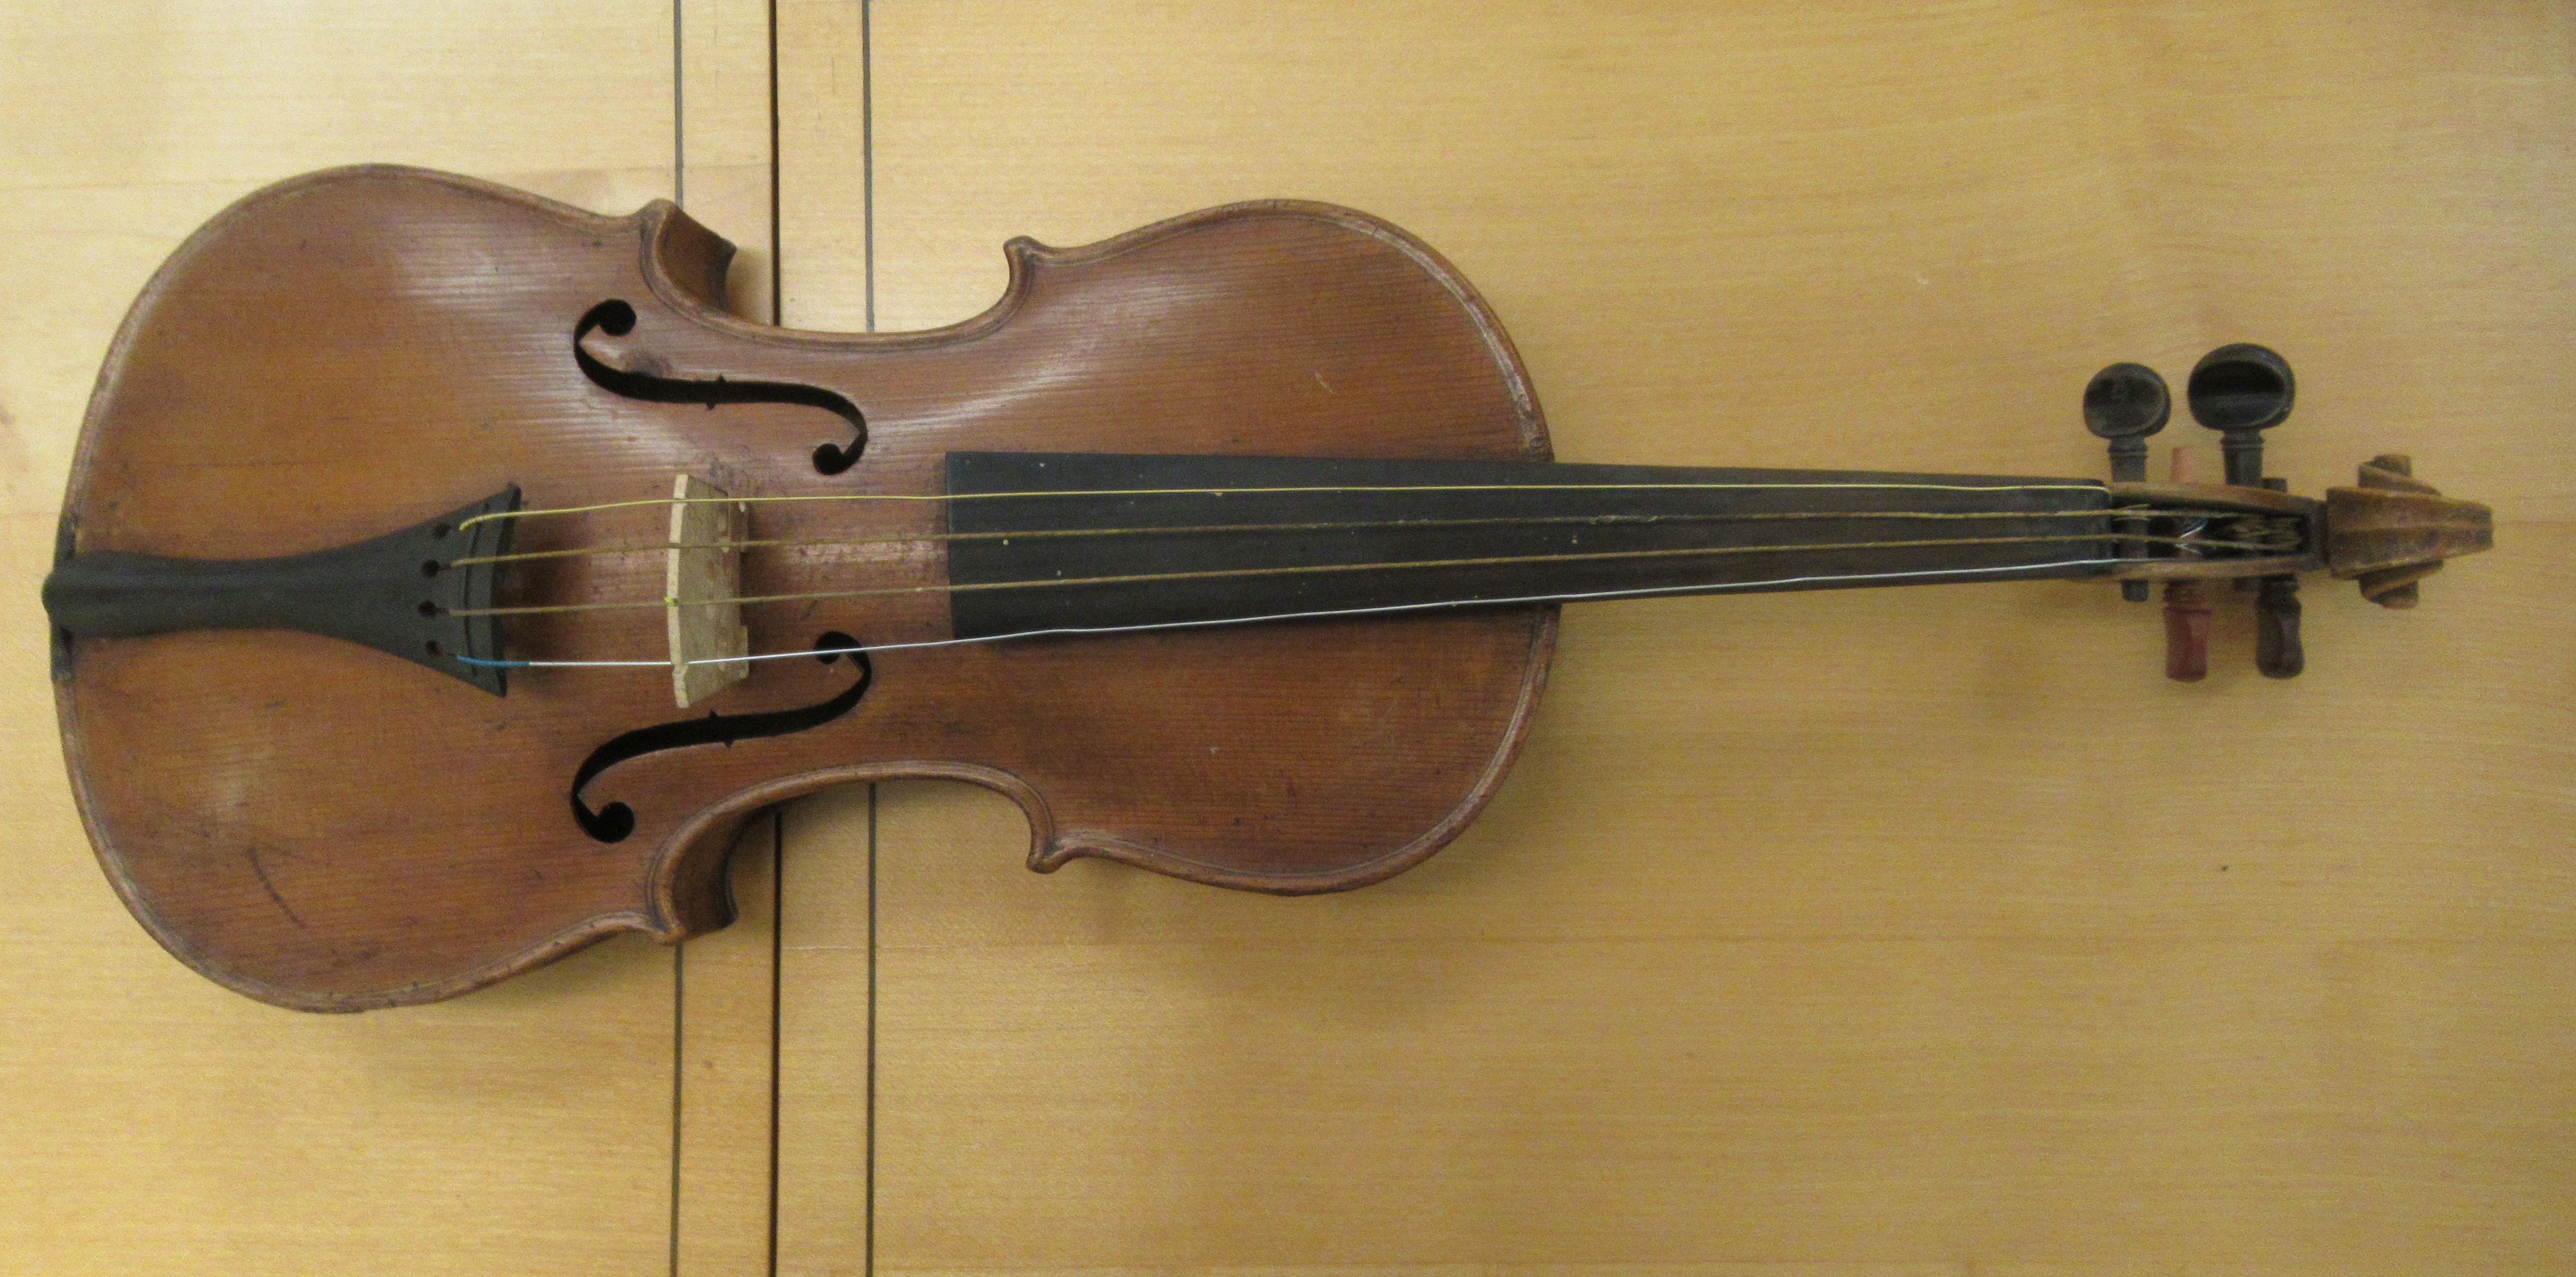 Three 19th/20thC violins, one with a one piece back  14"L; the others with two piece backs  13" - Image 13 of 16